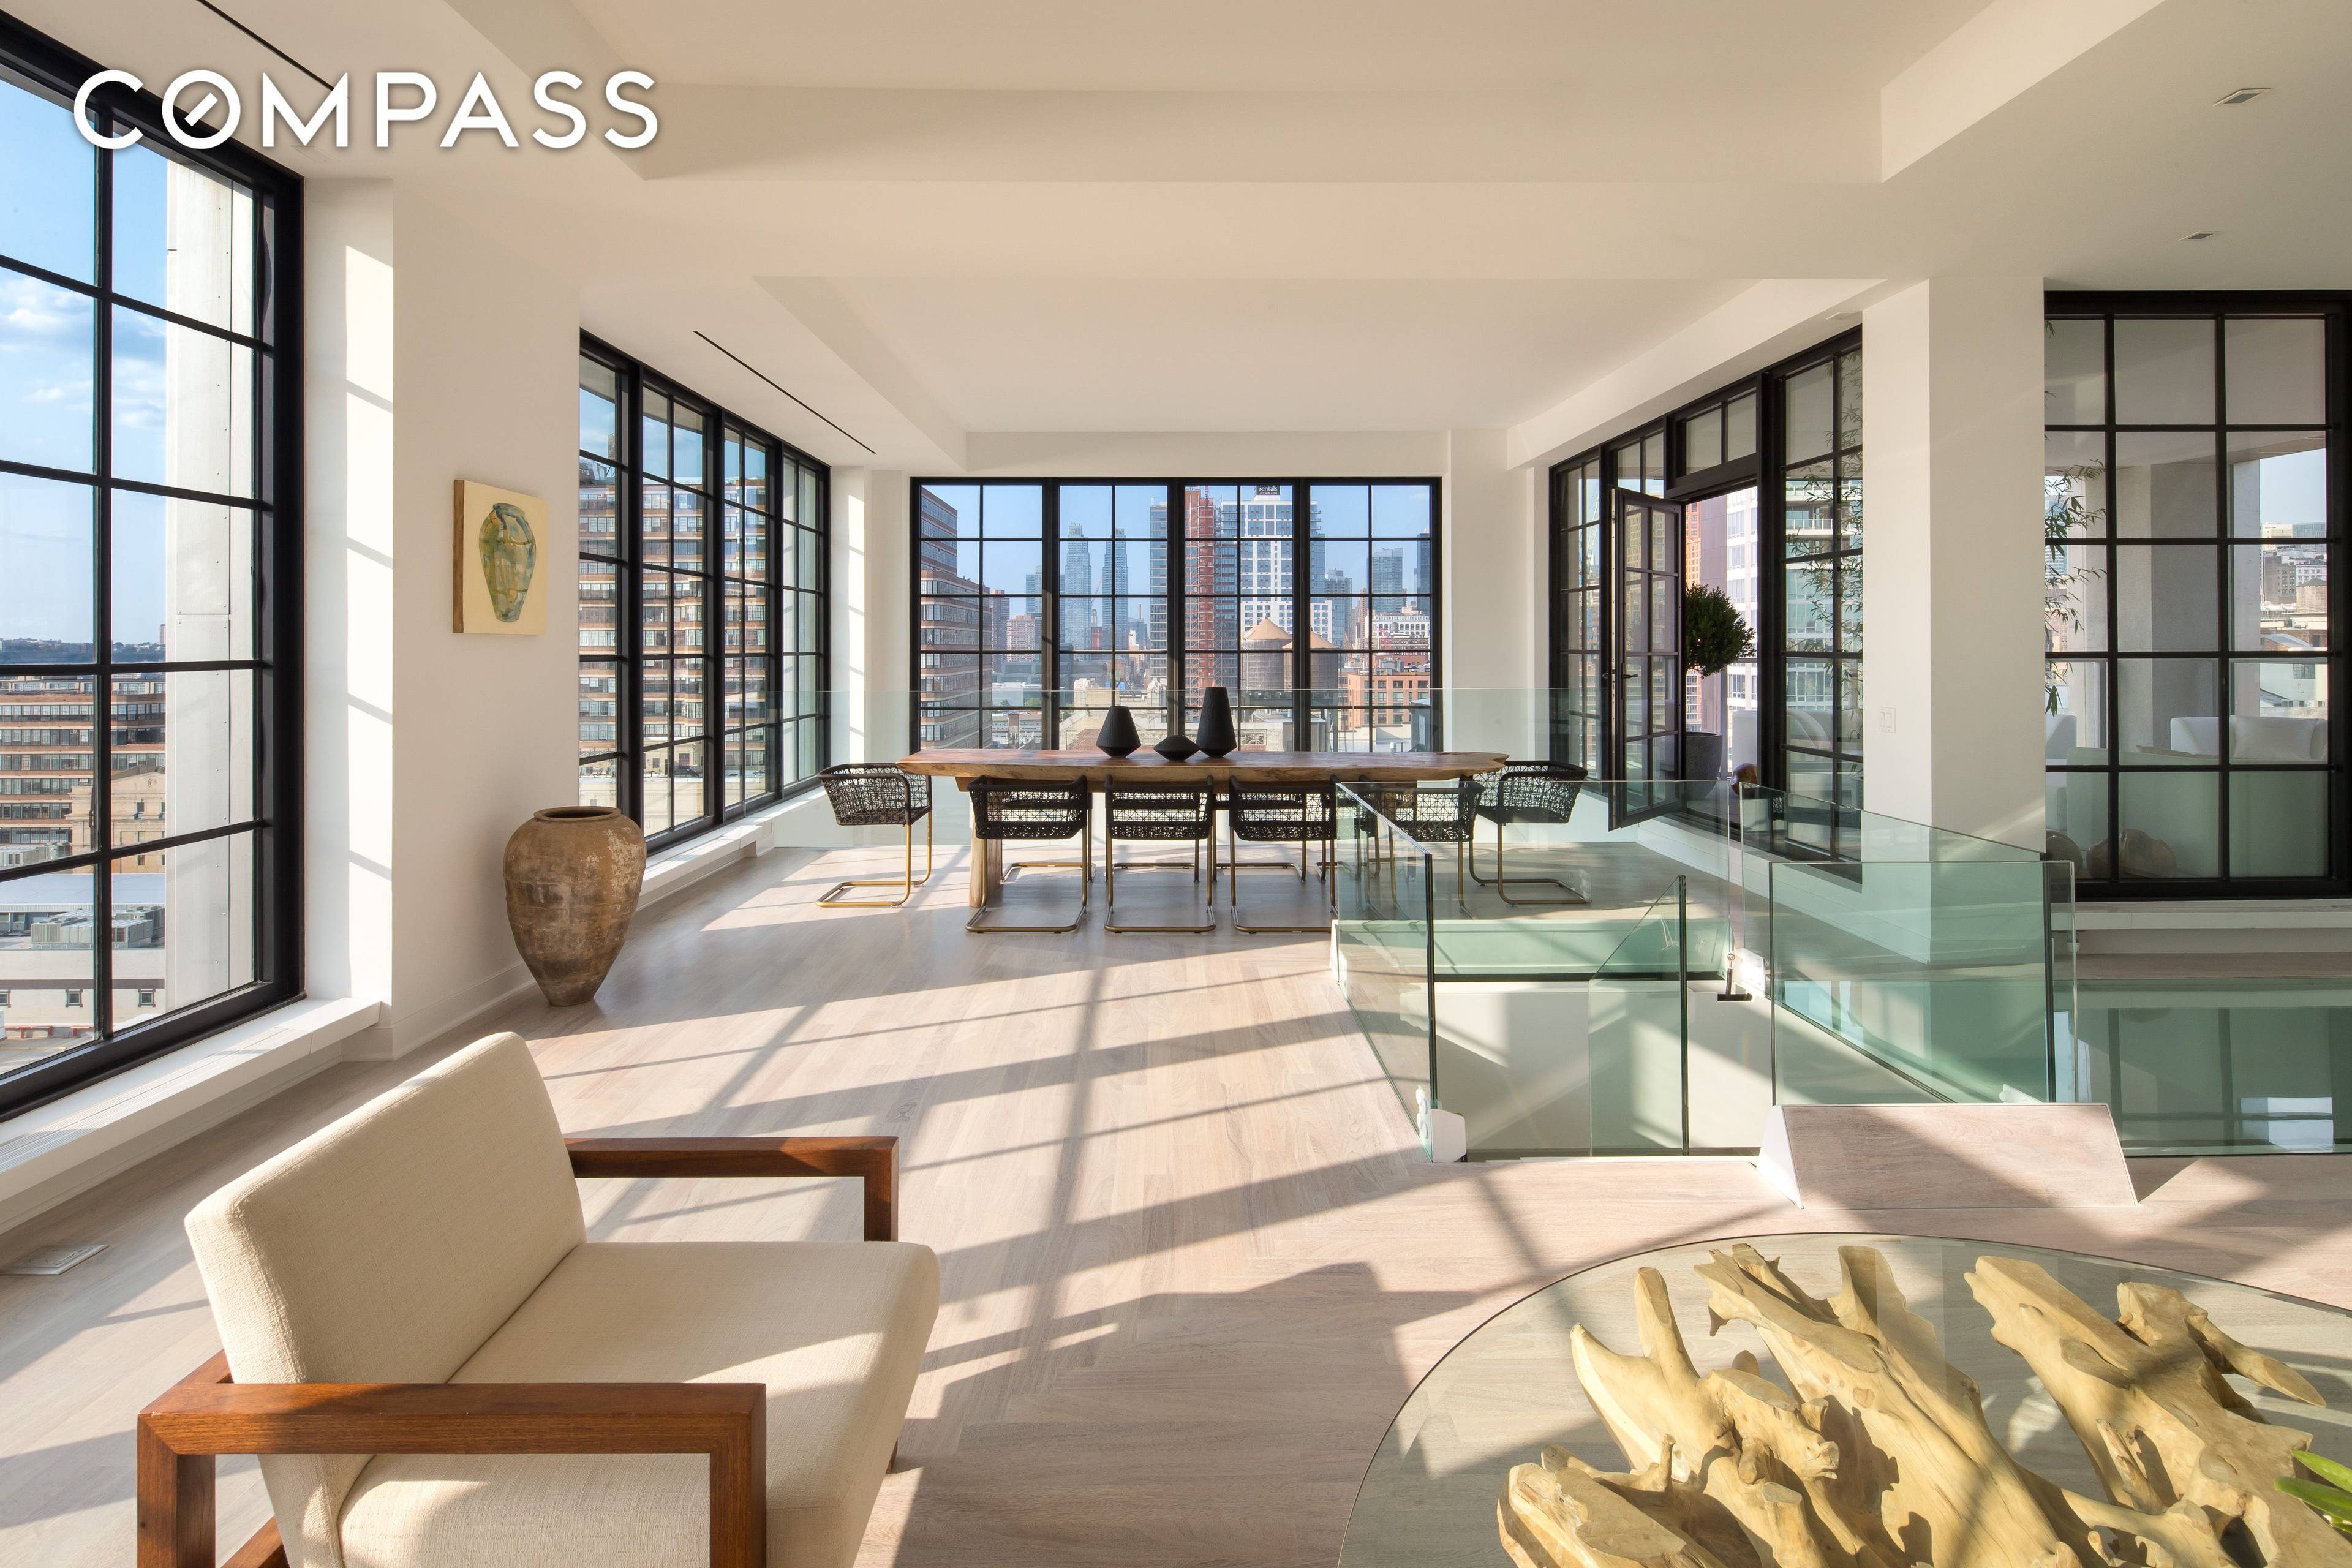 Enter a world of refined luxury and architectural brilliance at 200 11th Avenue PH1, an extraordinary penthouse nestled in the heart of Chelsea.